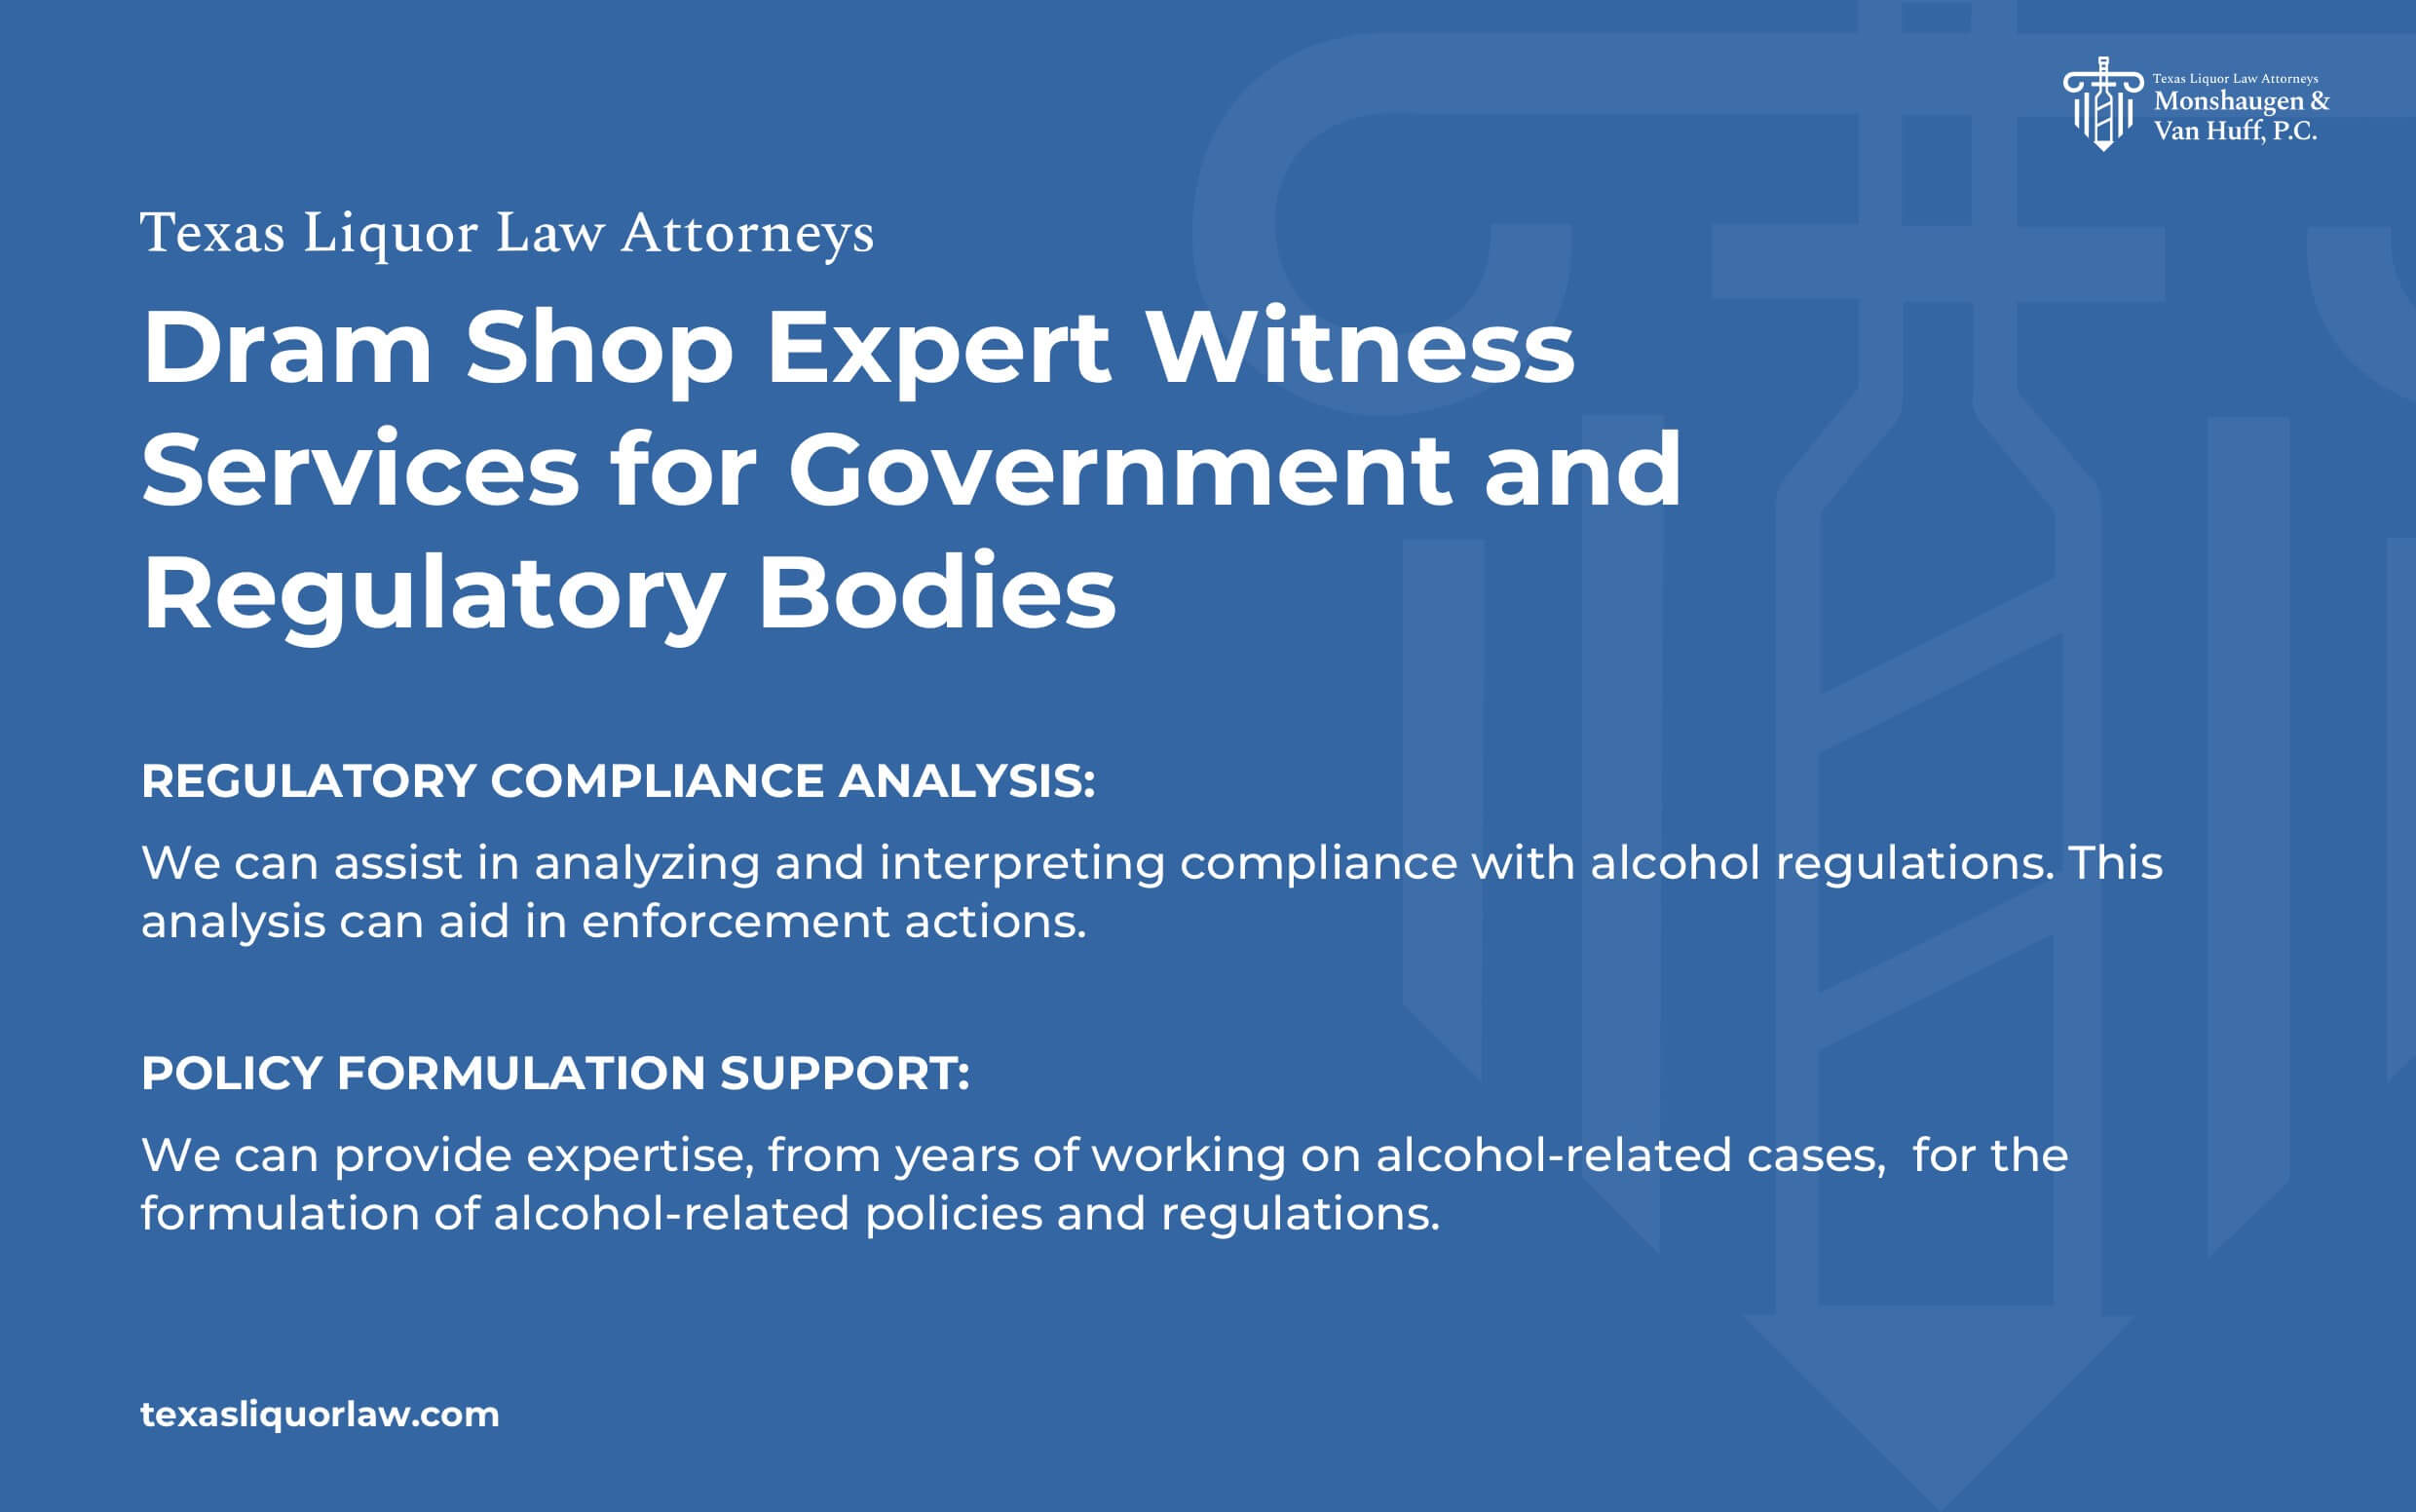 Dram Shop Expert Witness Services For Government and Regulatory Bodies